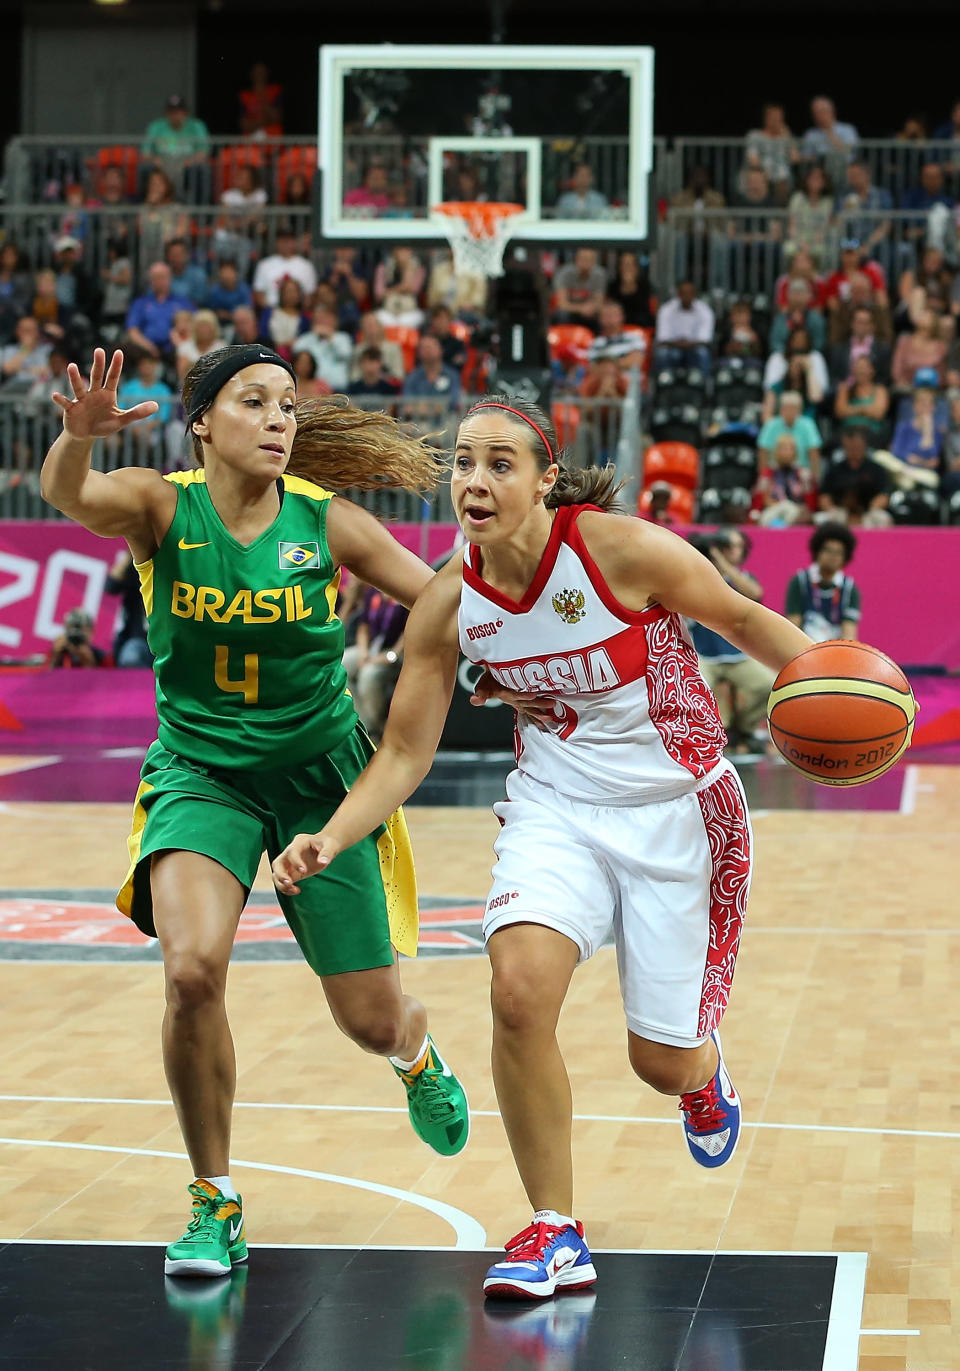 LONDON, ENGLAND - JULY 30: Becky Hammon #9 of Russia drives the ball past Adriana Pinto #4 of Brazil during the Women's Basketball Preliminary Round match on Day 3 at Basketball Arena on July 30, 2012 in London, England. (Photo by Christian Petersen/Getty Images)